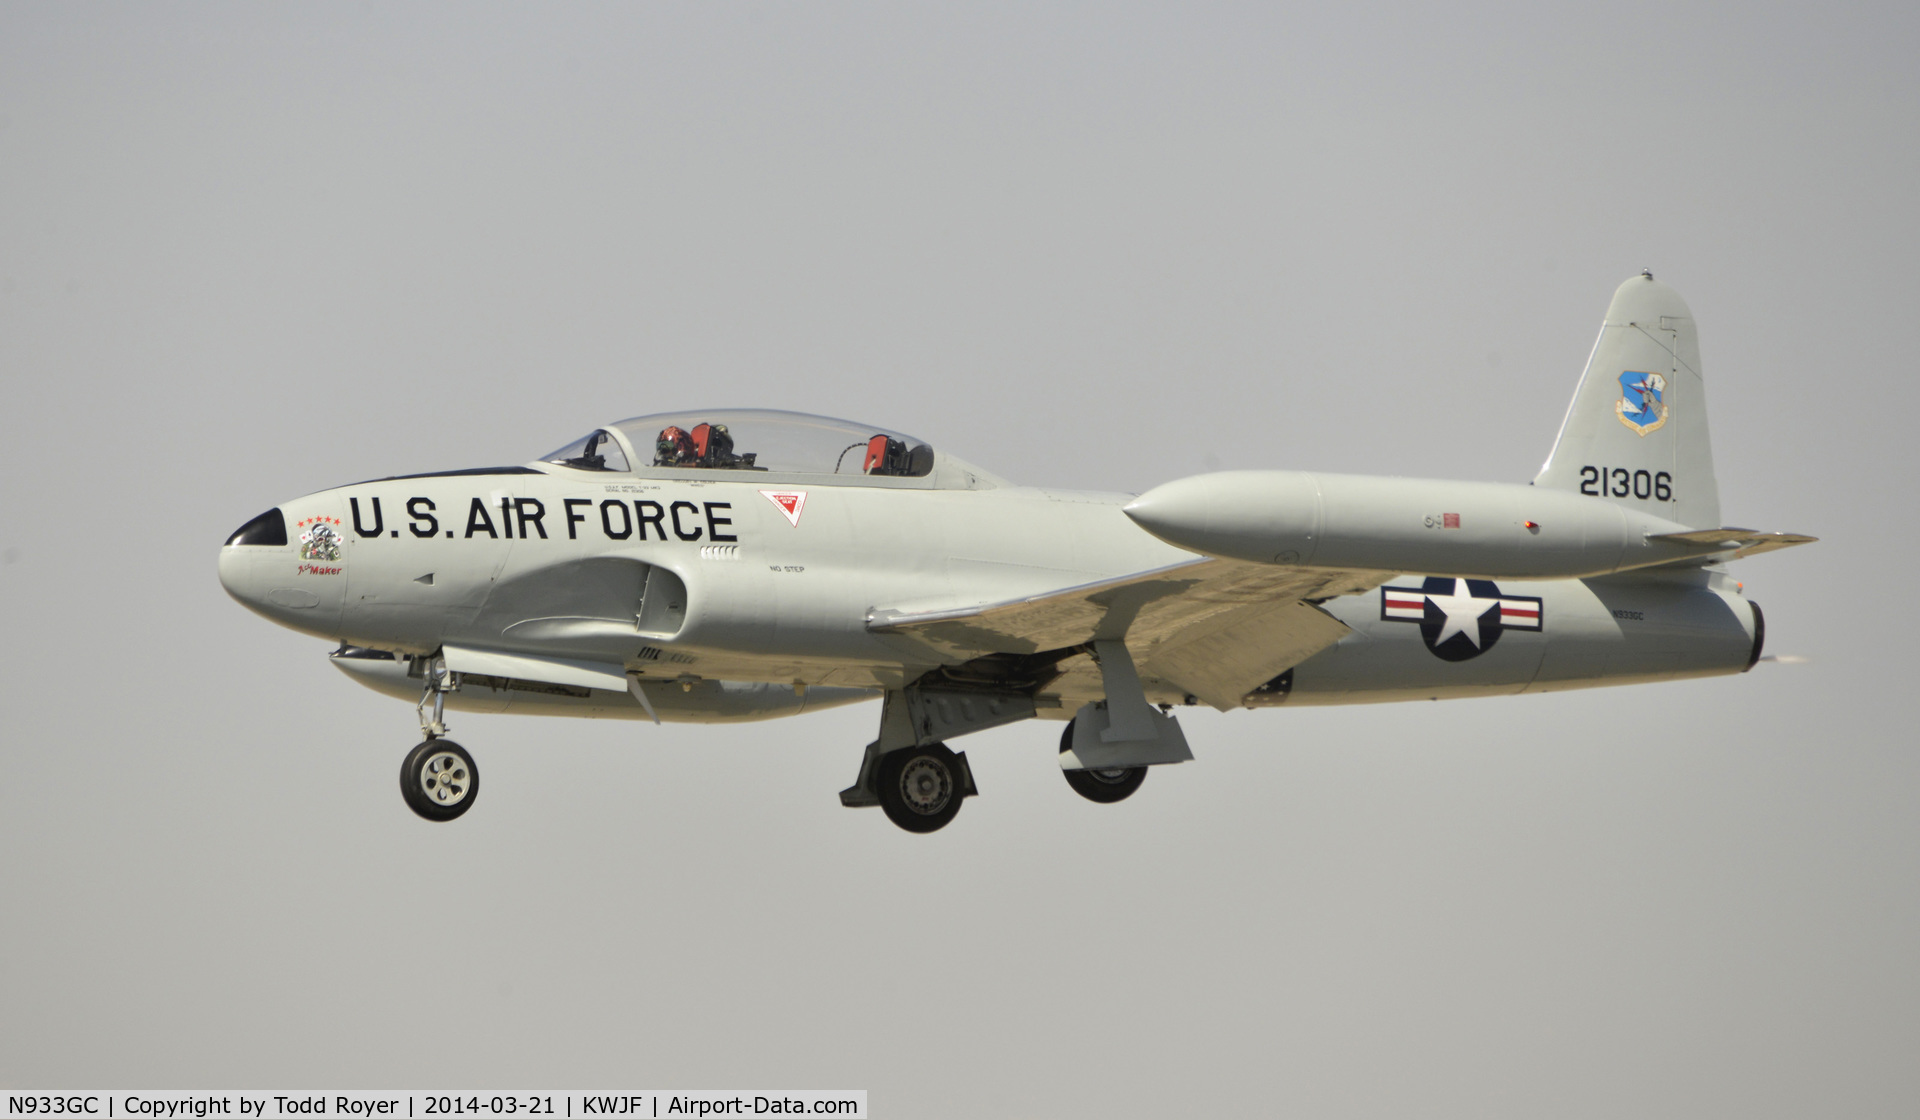 N933GC, 1954 Canadair T-33AN Silver Star 3 C/N T33-306, Performing at Los Angeles County Airshow 2014